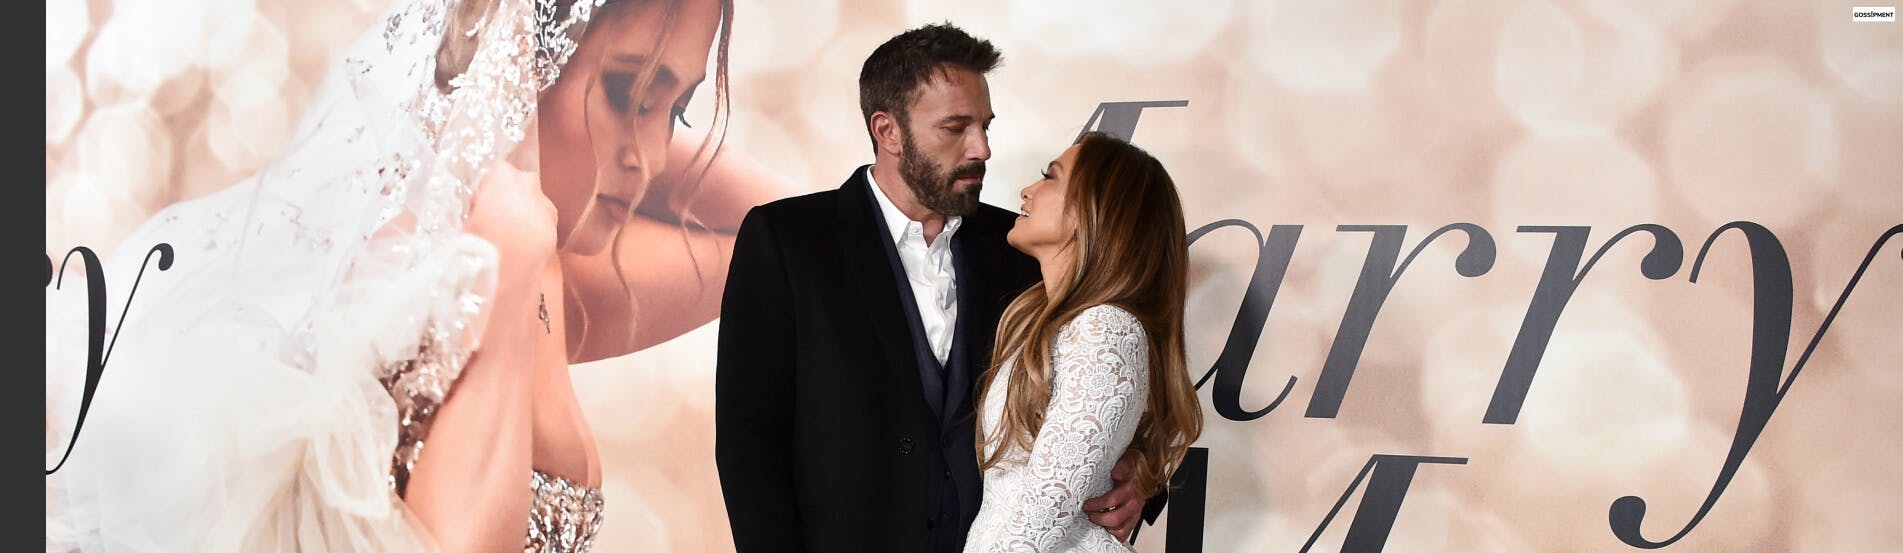 Cover Image for It’s Official! JLo And Ben Affleck Are Married, Singer Confirms